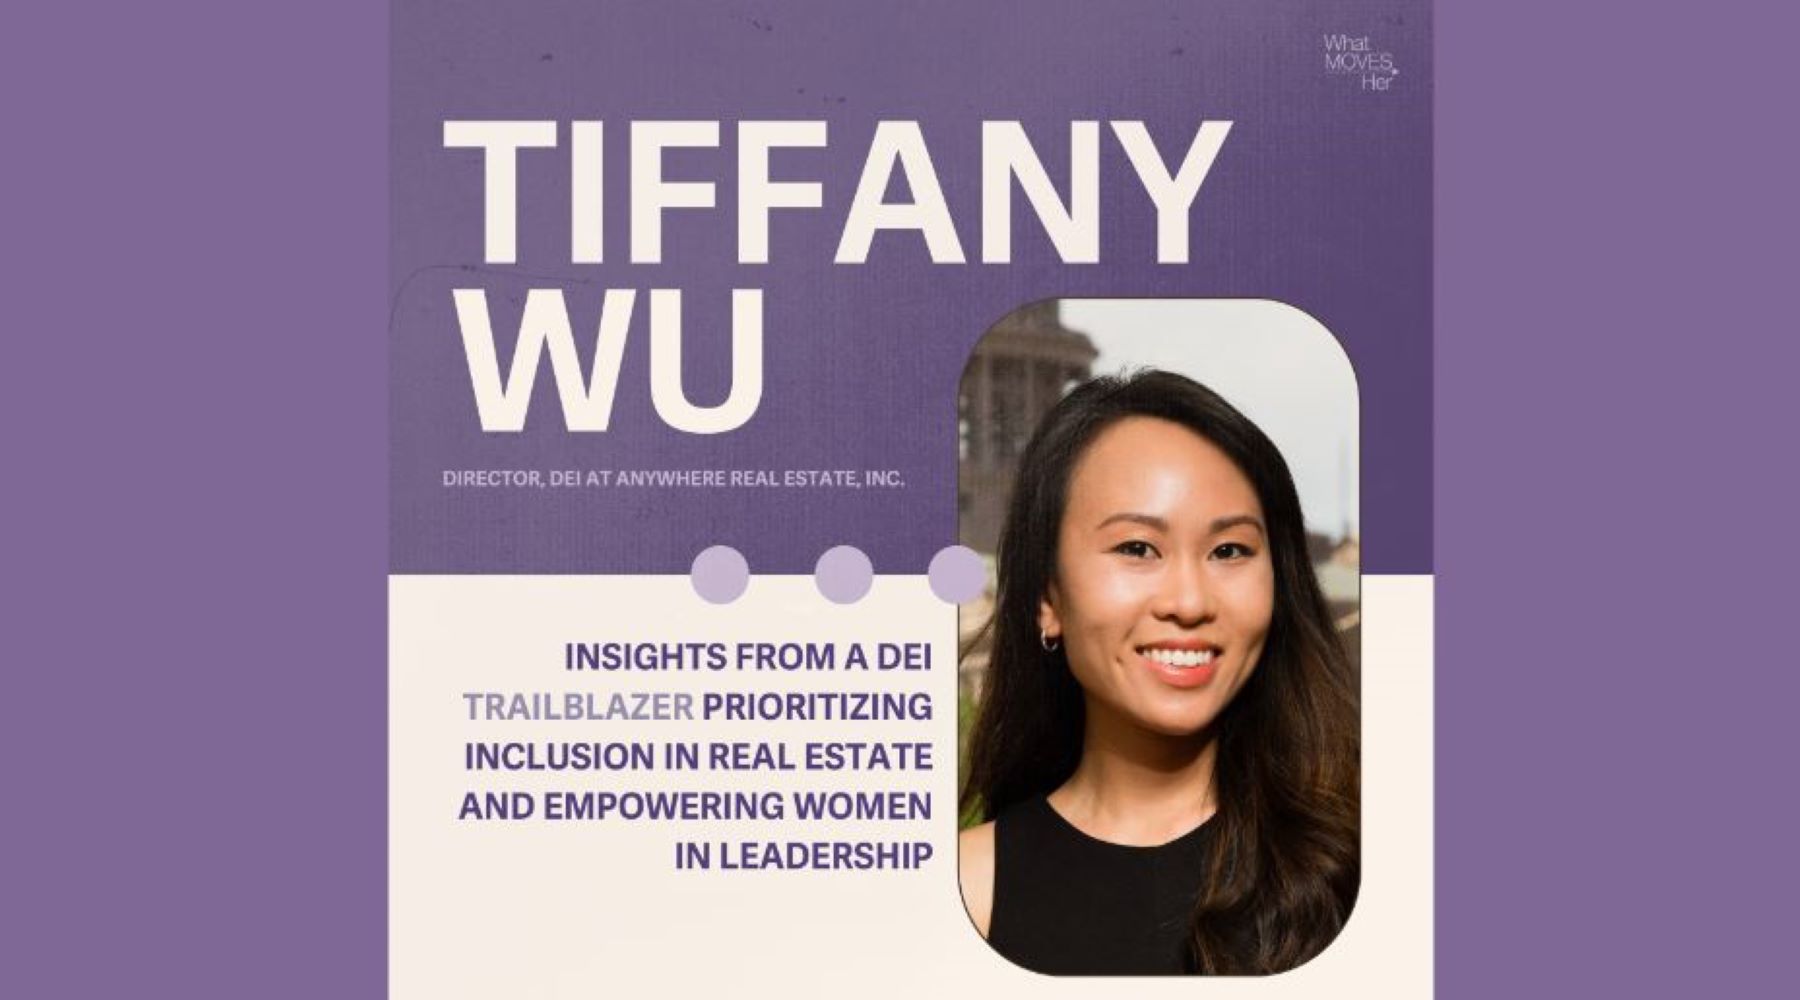 Insights from a DEI trailblazer prioritizing inclusion in real estate and empowering women in Leadership